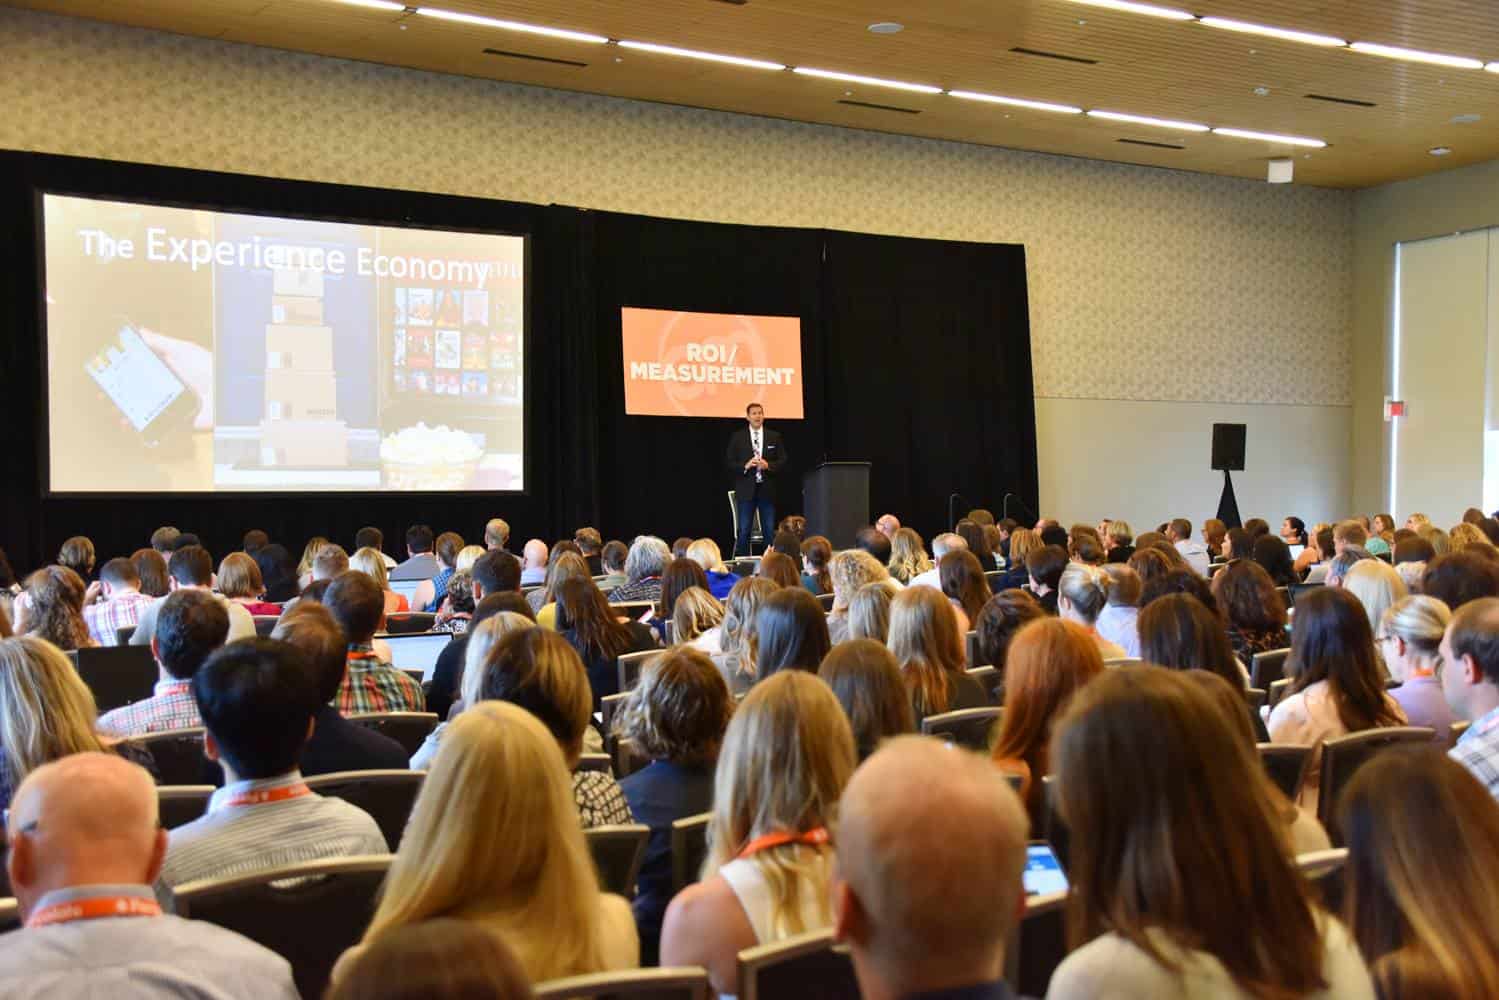 Attend the Industrial Marketing Summit and sessions at Content Marketing World 2019